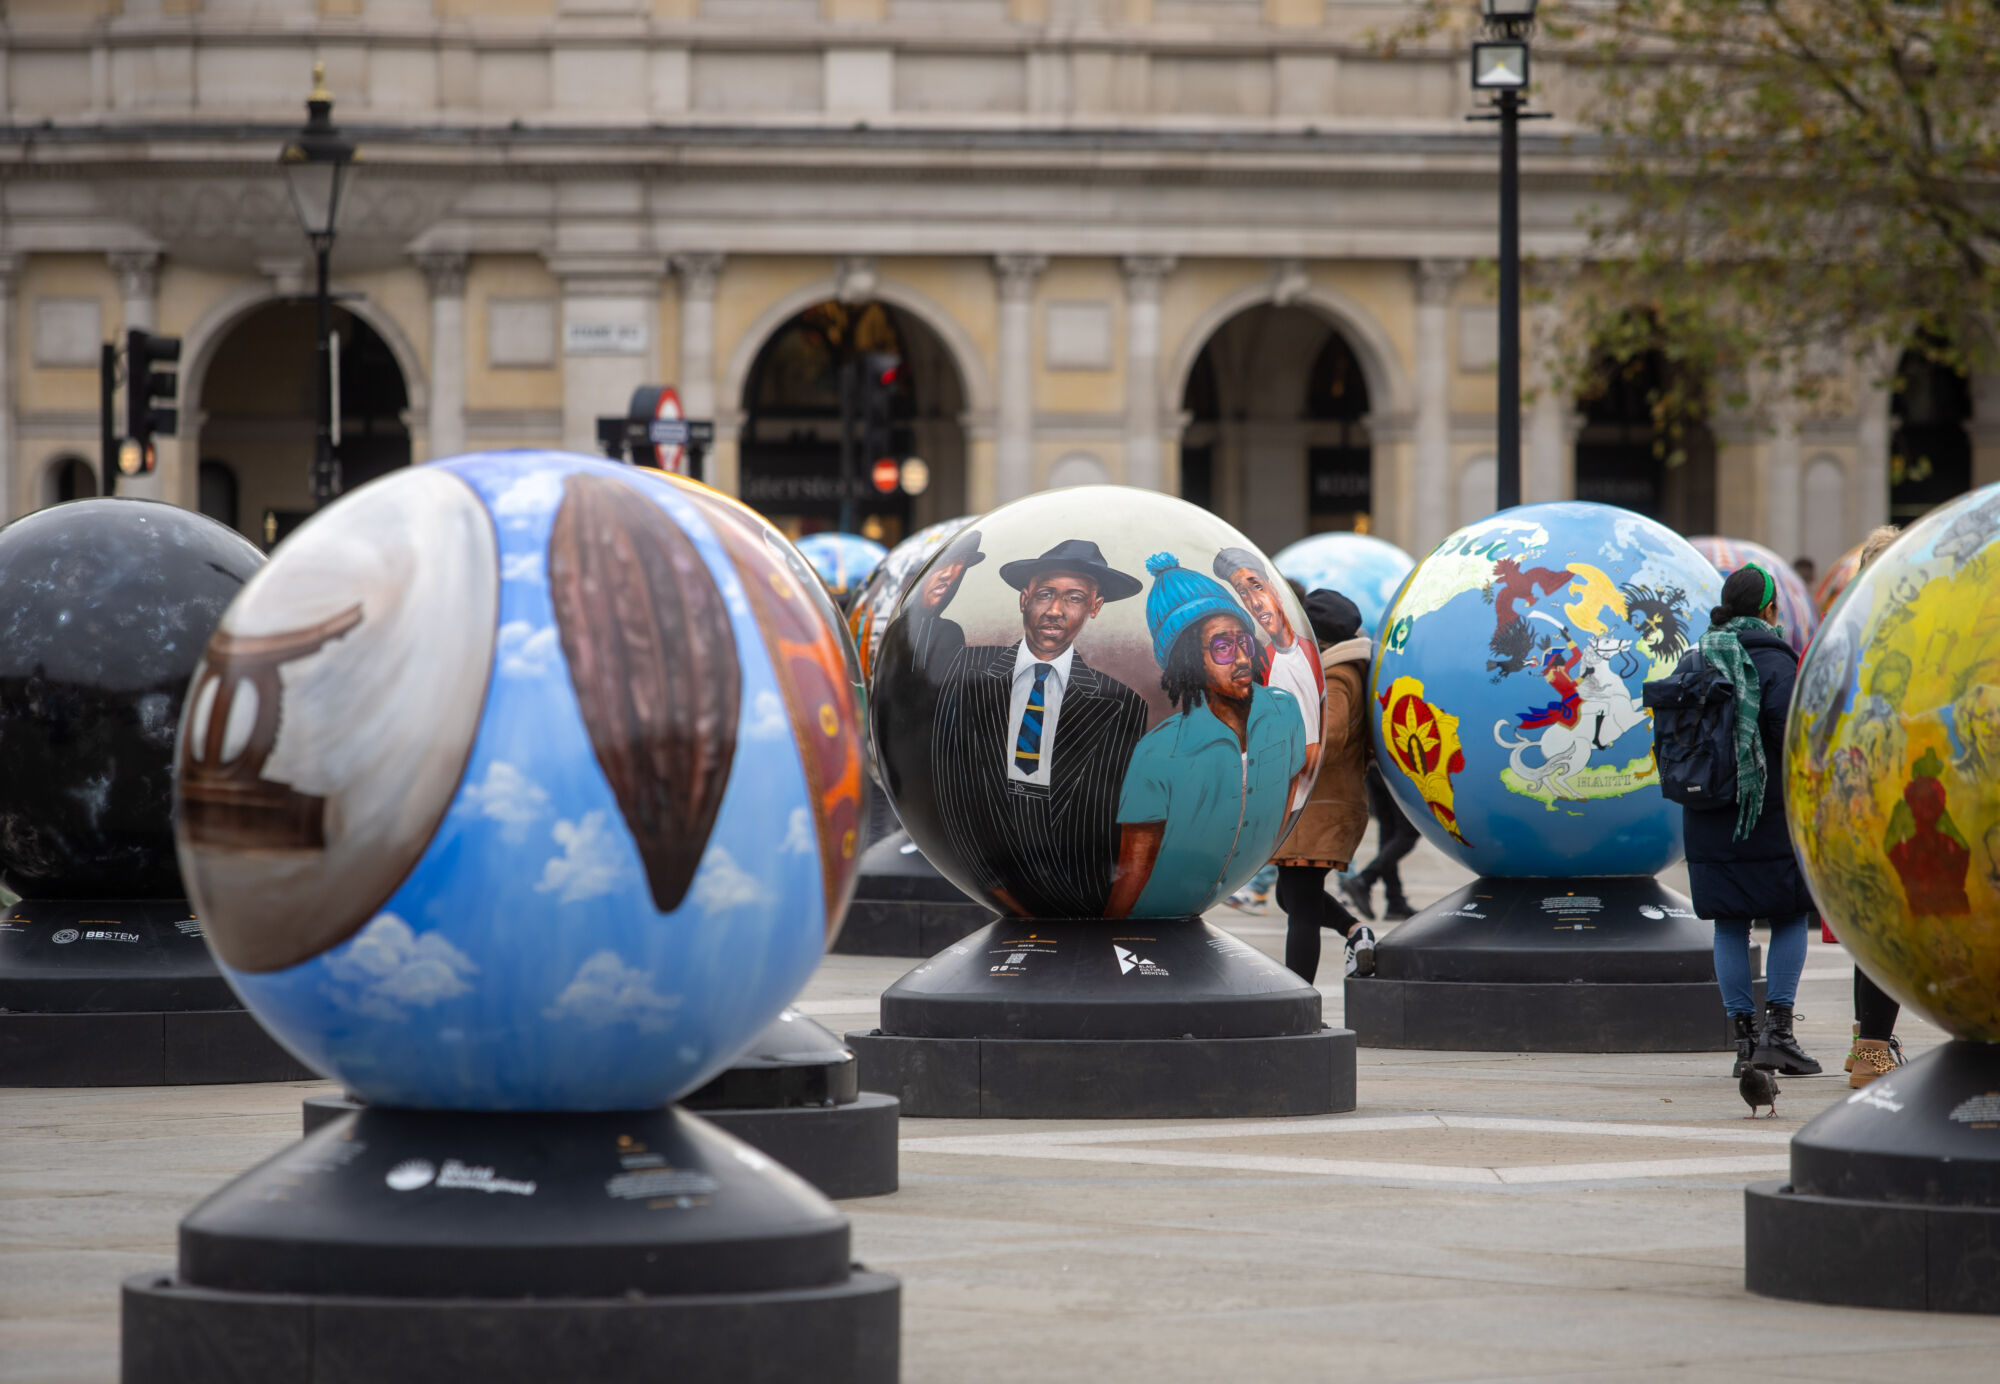 The Wick - FREE EDITORIAL & ONLINE USE  © Jeff Moore

The World Reimagined takes over Trafalgar Square with final installation showcase ahead of Bonhams auction. 

96 art education globes designed by acclaimed artists are staged in Trafalgar Square in quest for racial equality, justice and historic recognition. 

18 globes will be auctioned by Bonhams from 17 to 25 November in support of The World Reimagined project.